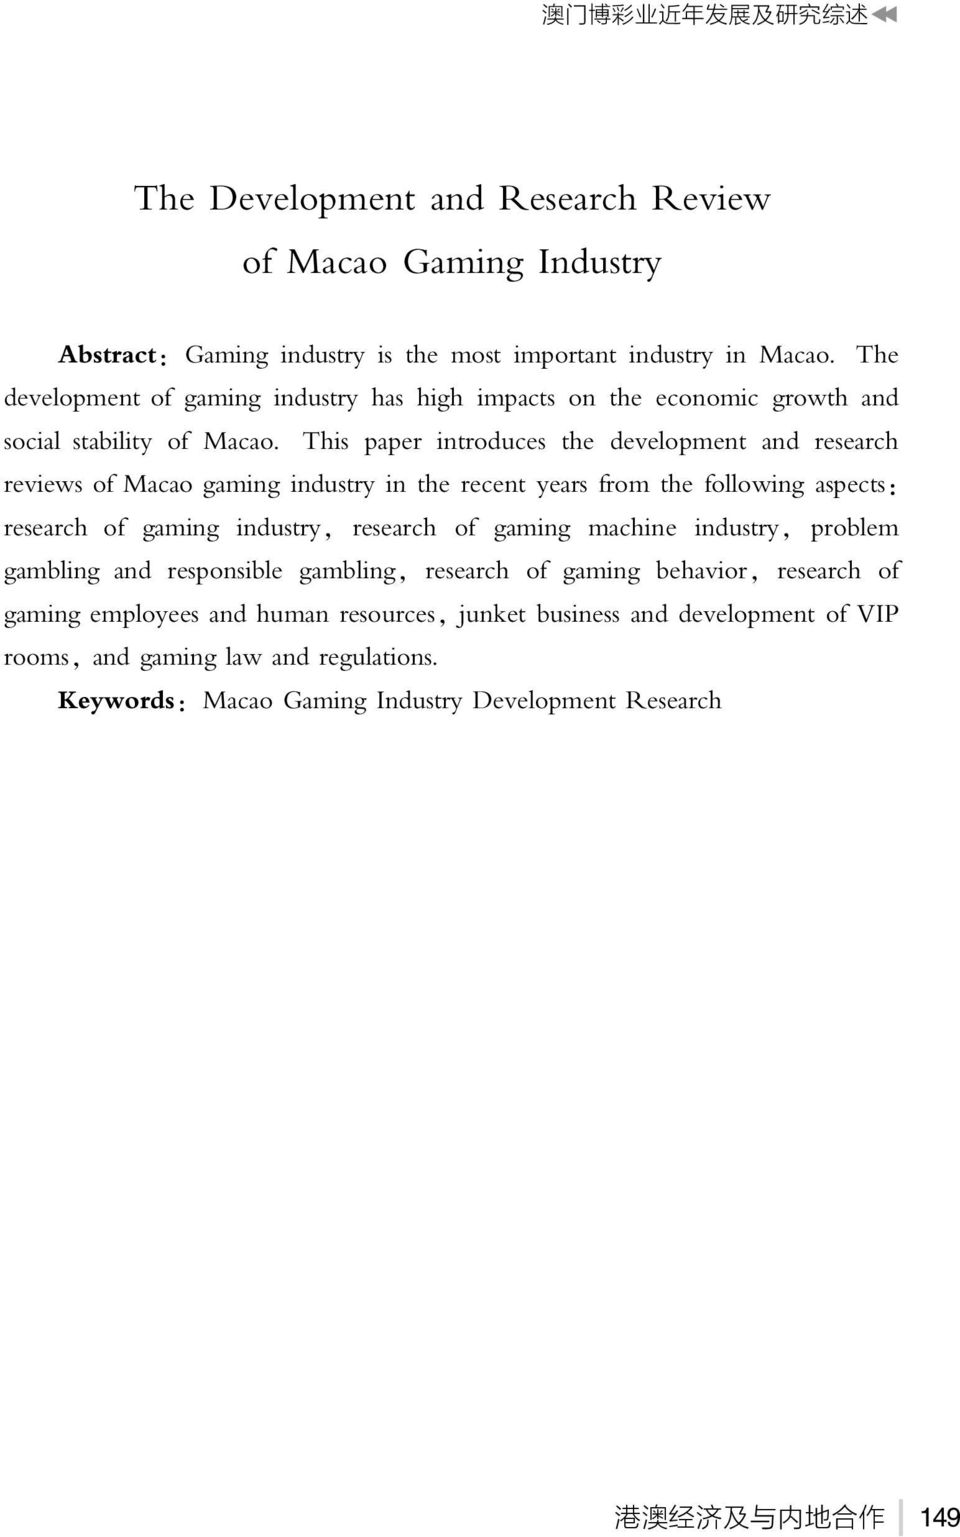 from the following aspects: research of gaming industry, research of gaming machine industry, problem gambling and responsible gambling, research of gaming behavior, research of